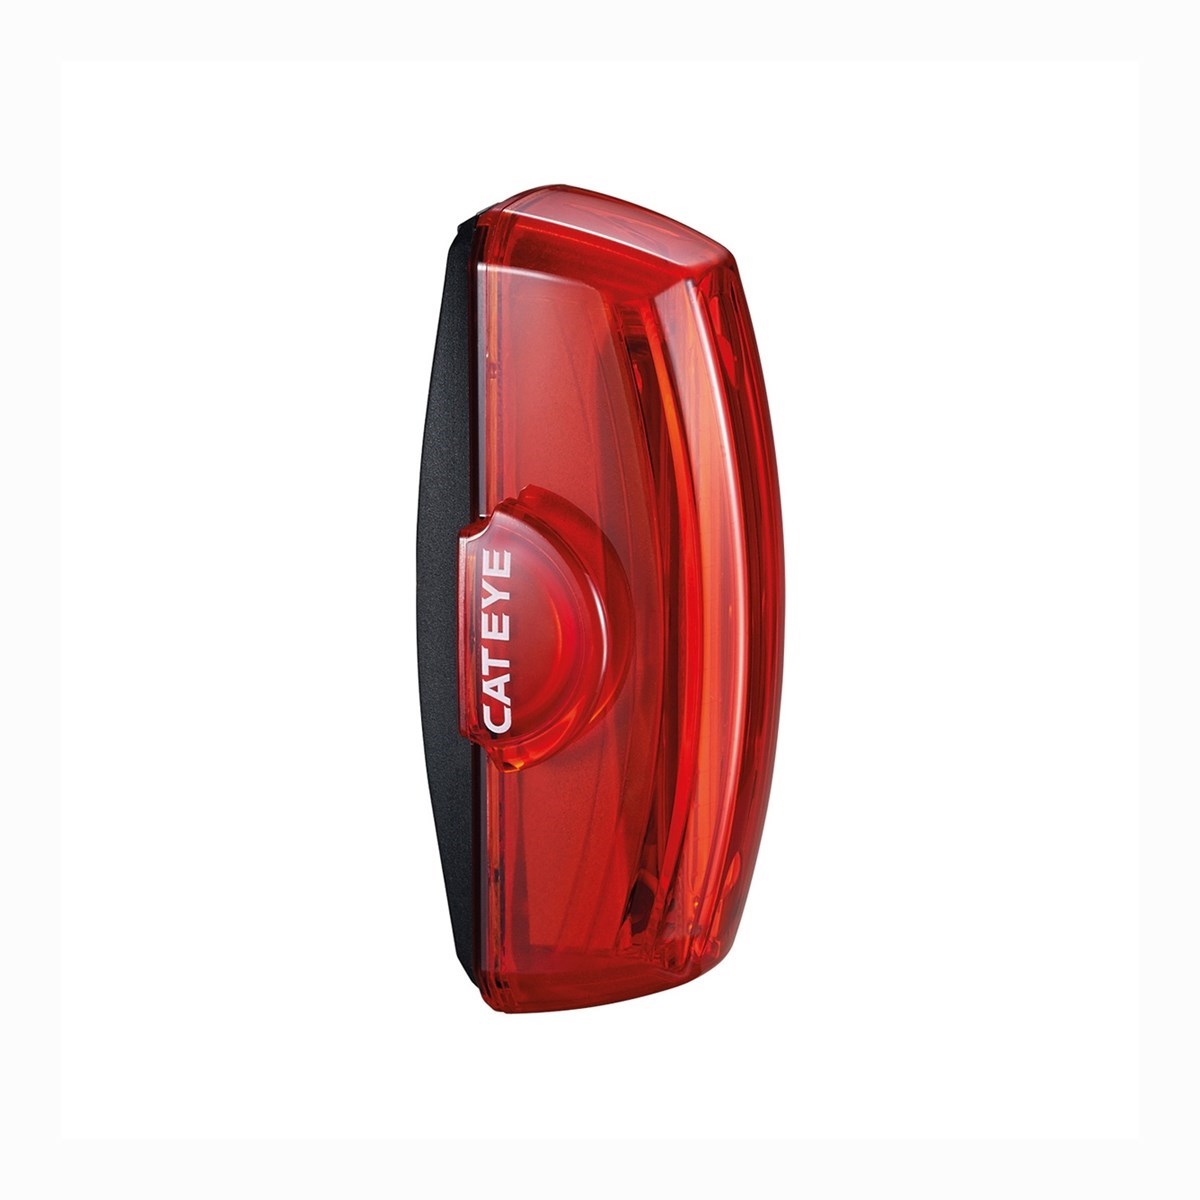 Cateye Rapid X2 USB Rechargeable Rear Light 2015 product image